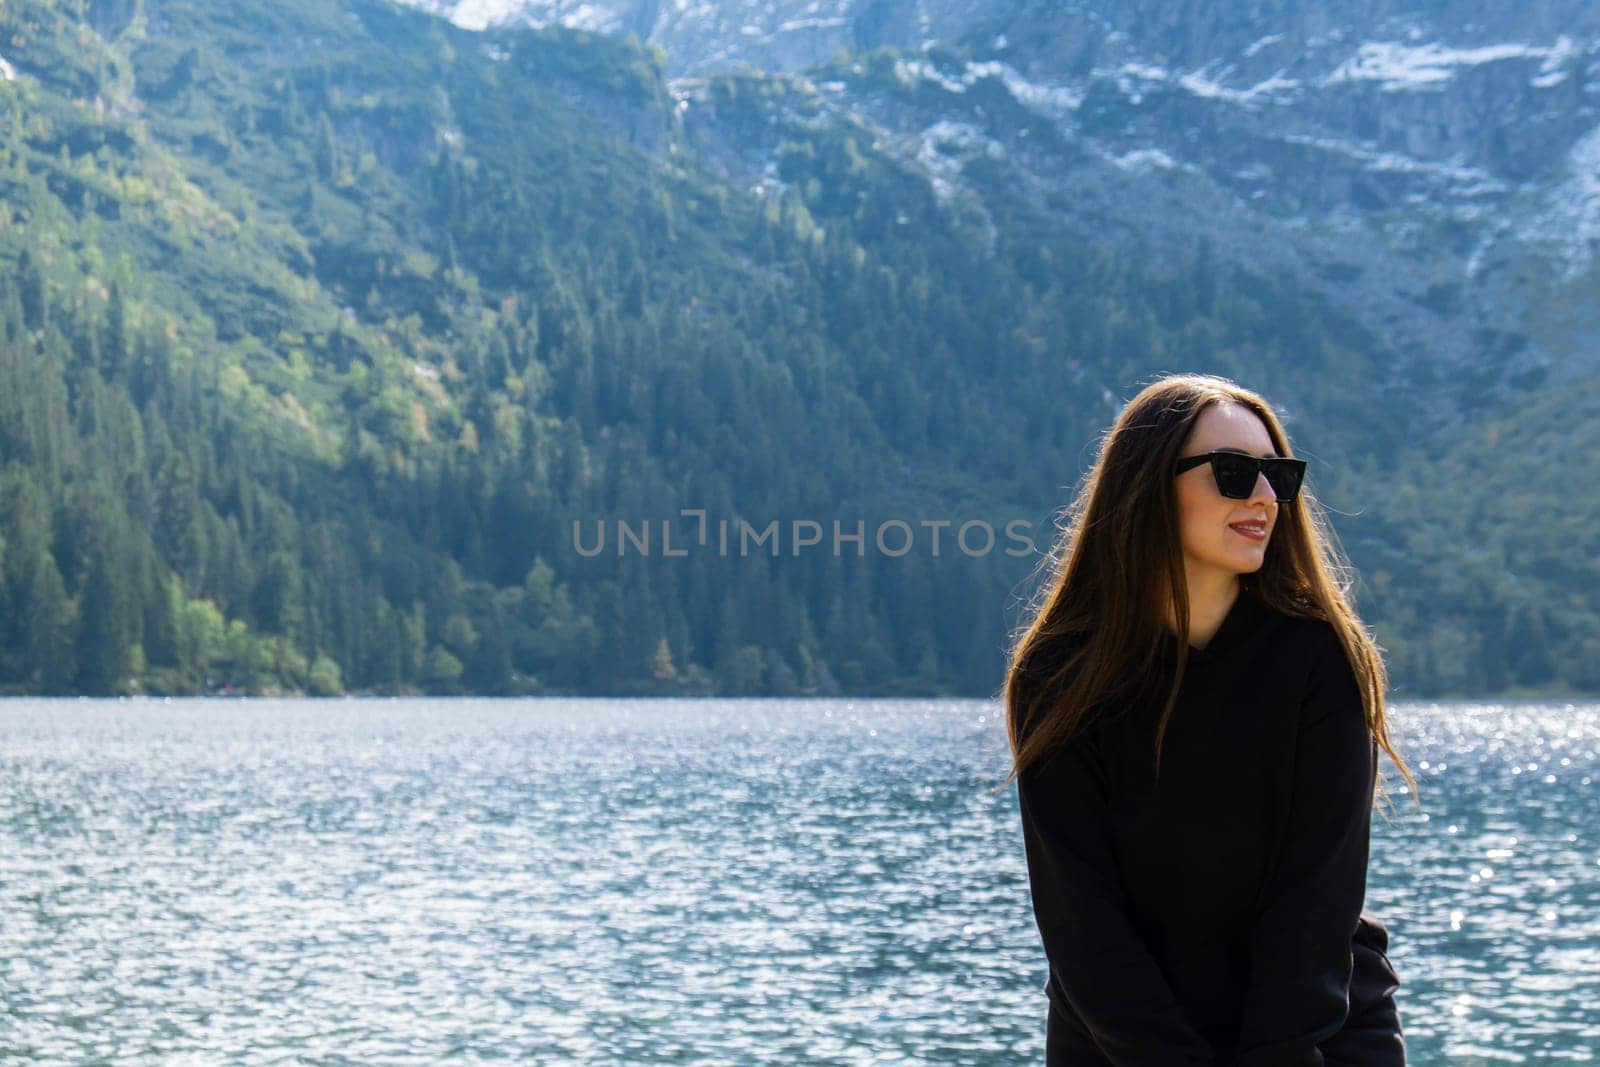 Young woman enjoying nature in Morskie Oko Snowy Mountain Hut in Polish Tatry mountains Zakopane Poland. Naturecore aesthetic beautiful green hills. Mental and physical wellbeing Travel outdoors tourist destination